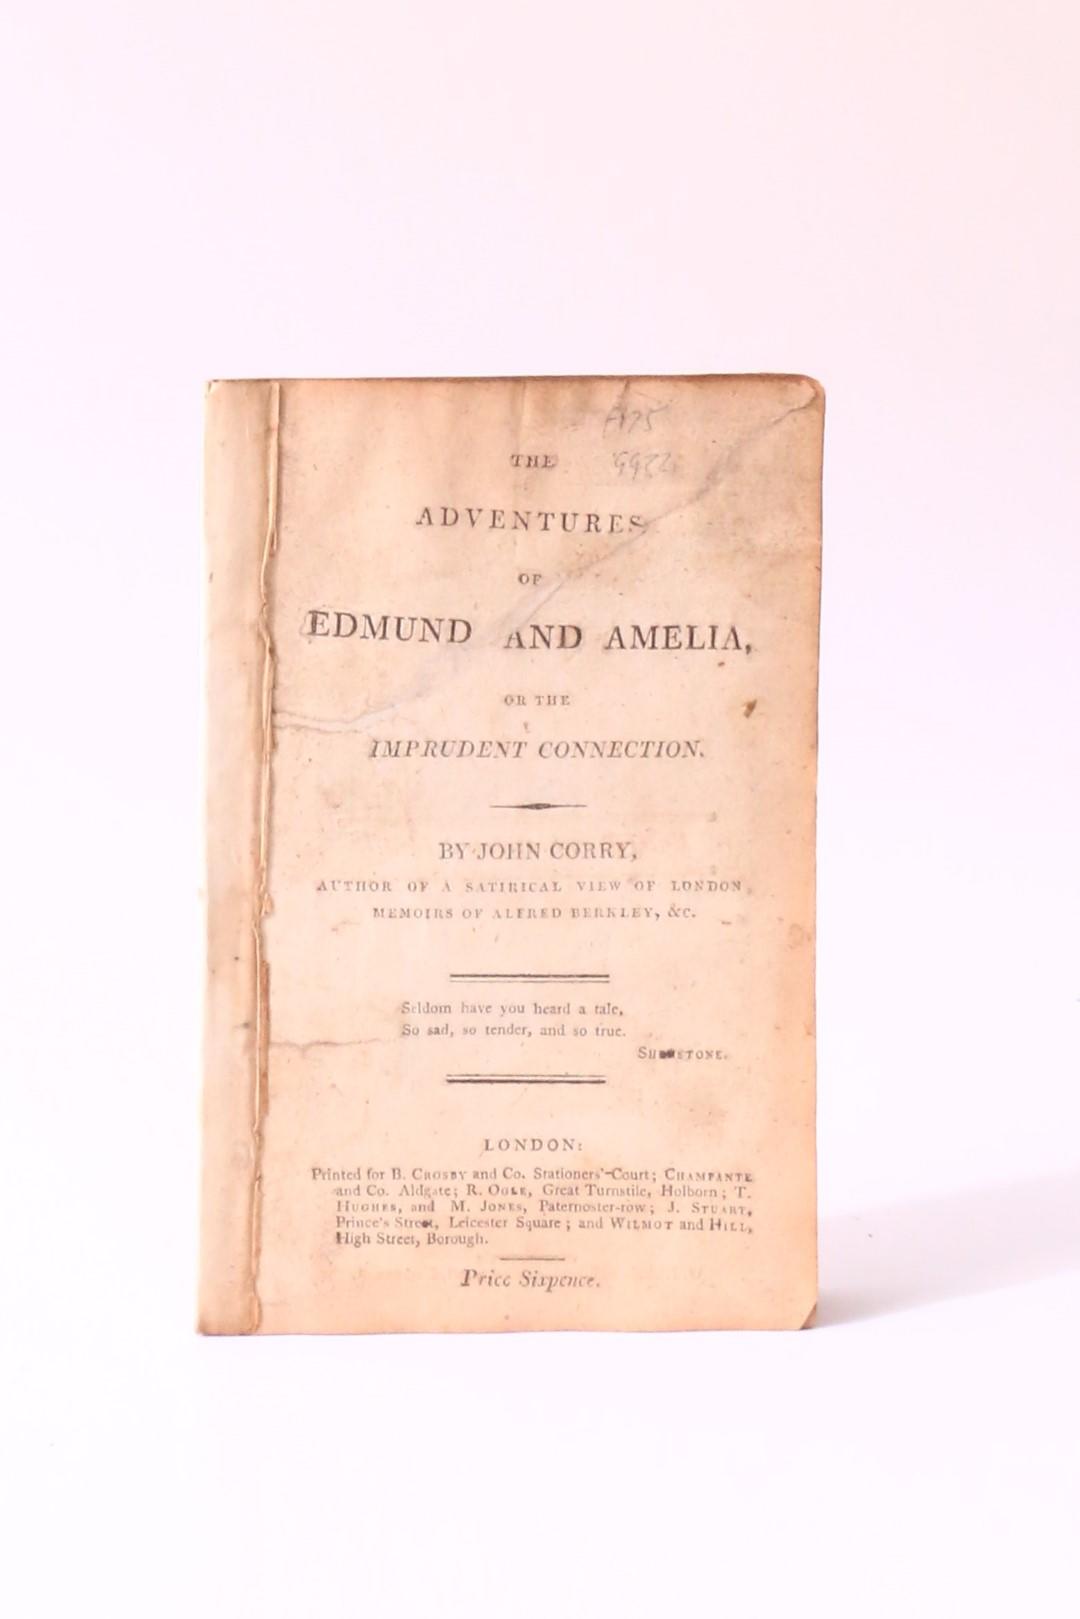 John Corry - The Adventures of Edmund and Amelia, or the Imprudent Connection - B. Crosby & Co, and Others, n.d. [1806], First Edition.